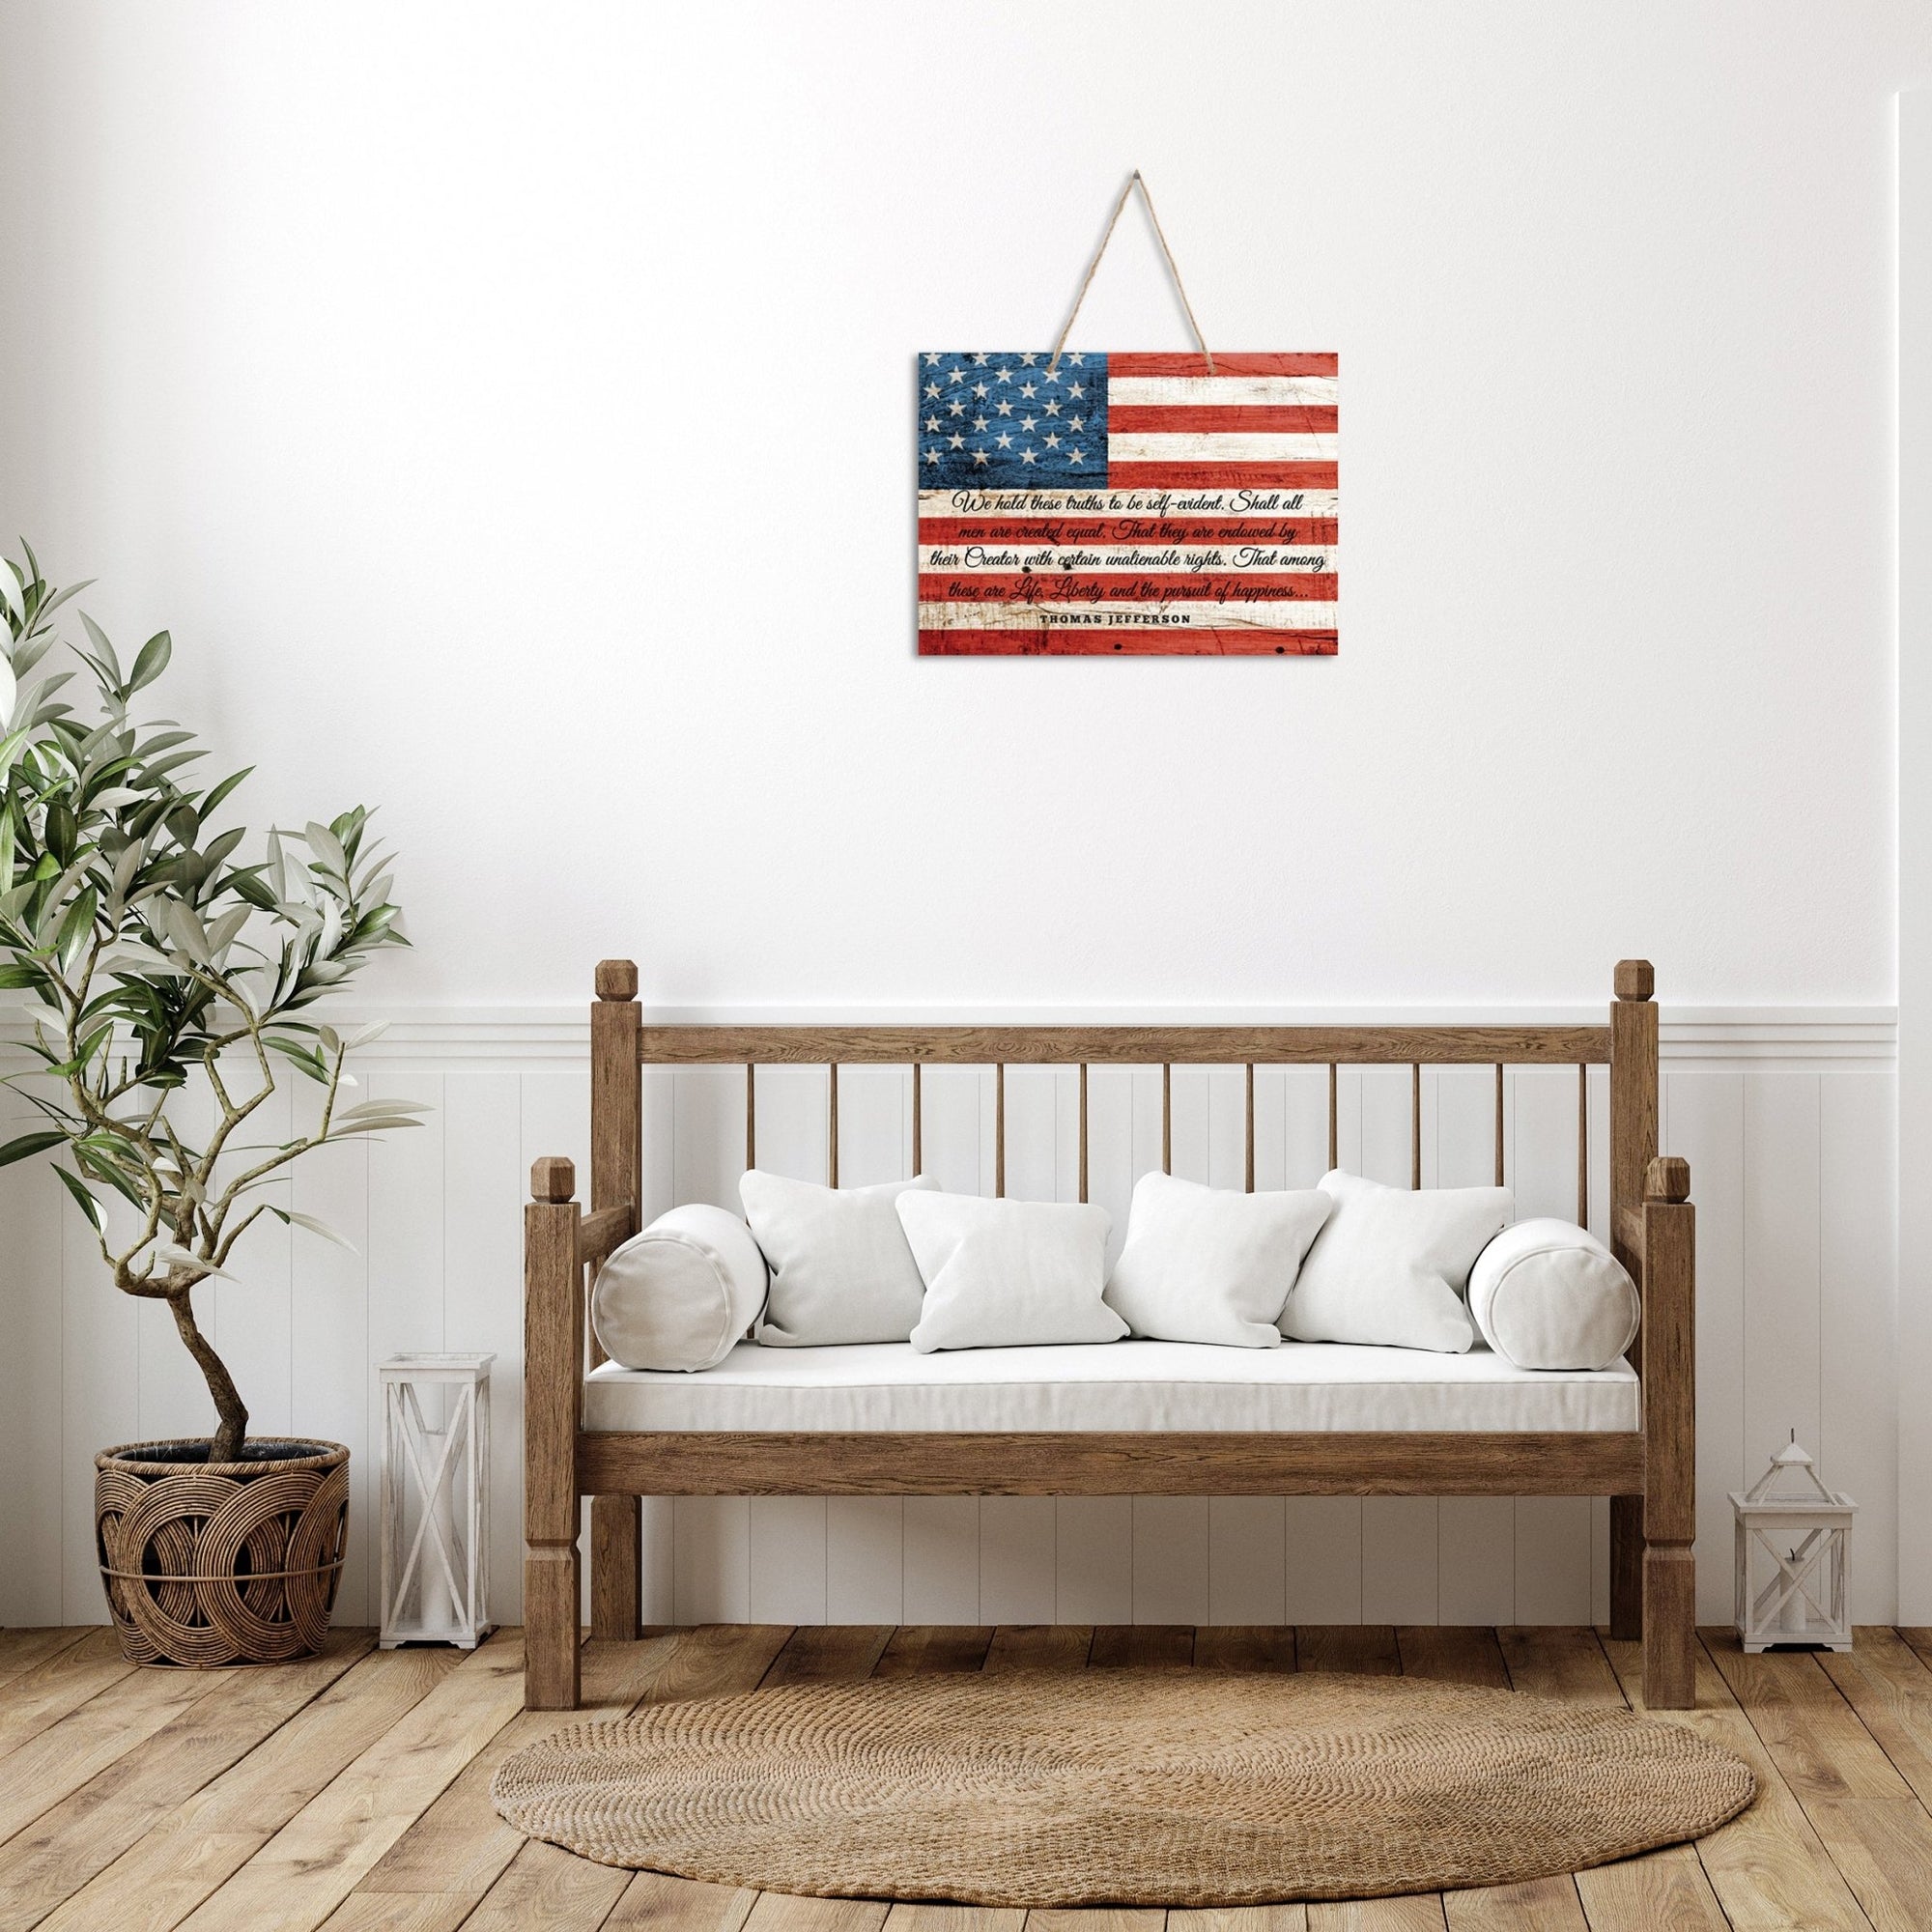 American Flag Veterans Day Patriotic Wall Hanging Rope Signs Vintage Décor Gift Ideas - Flag We Hold These Truths 2 - LifeSong Milestones